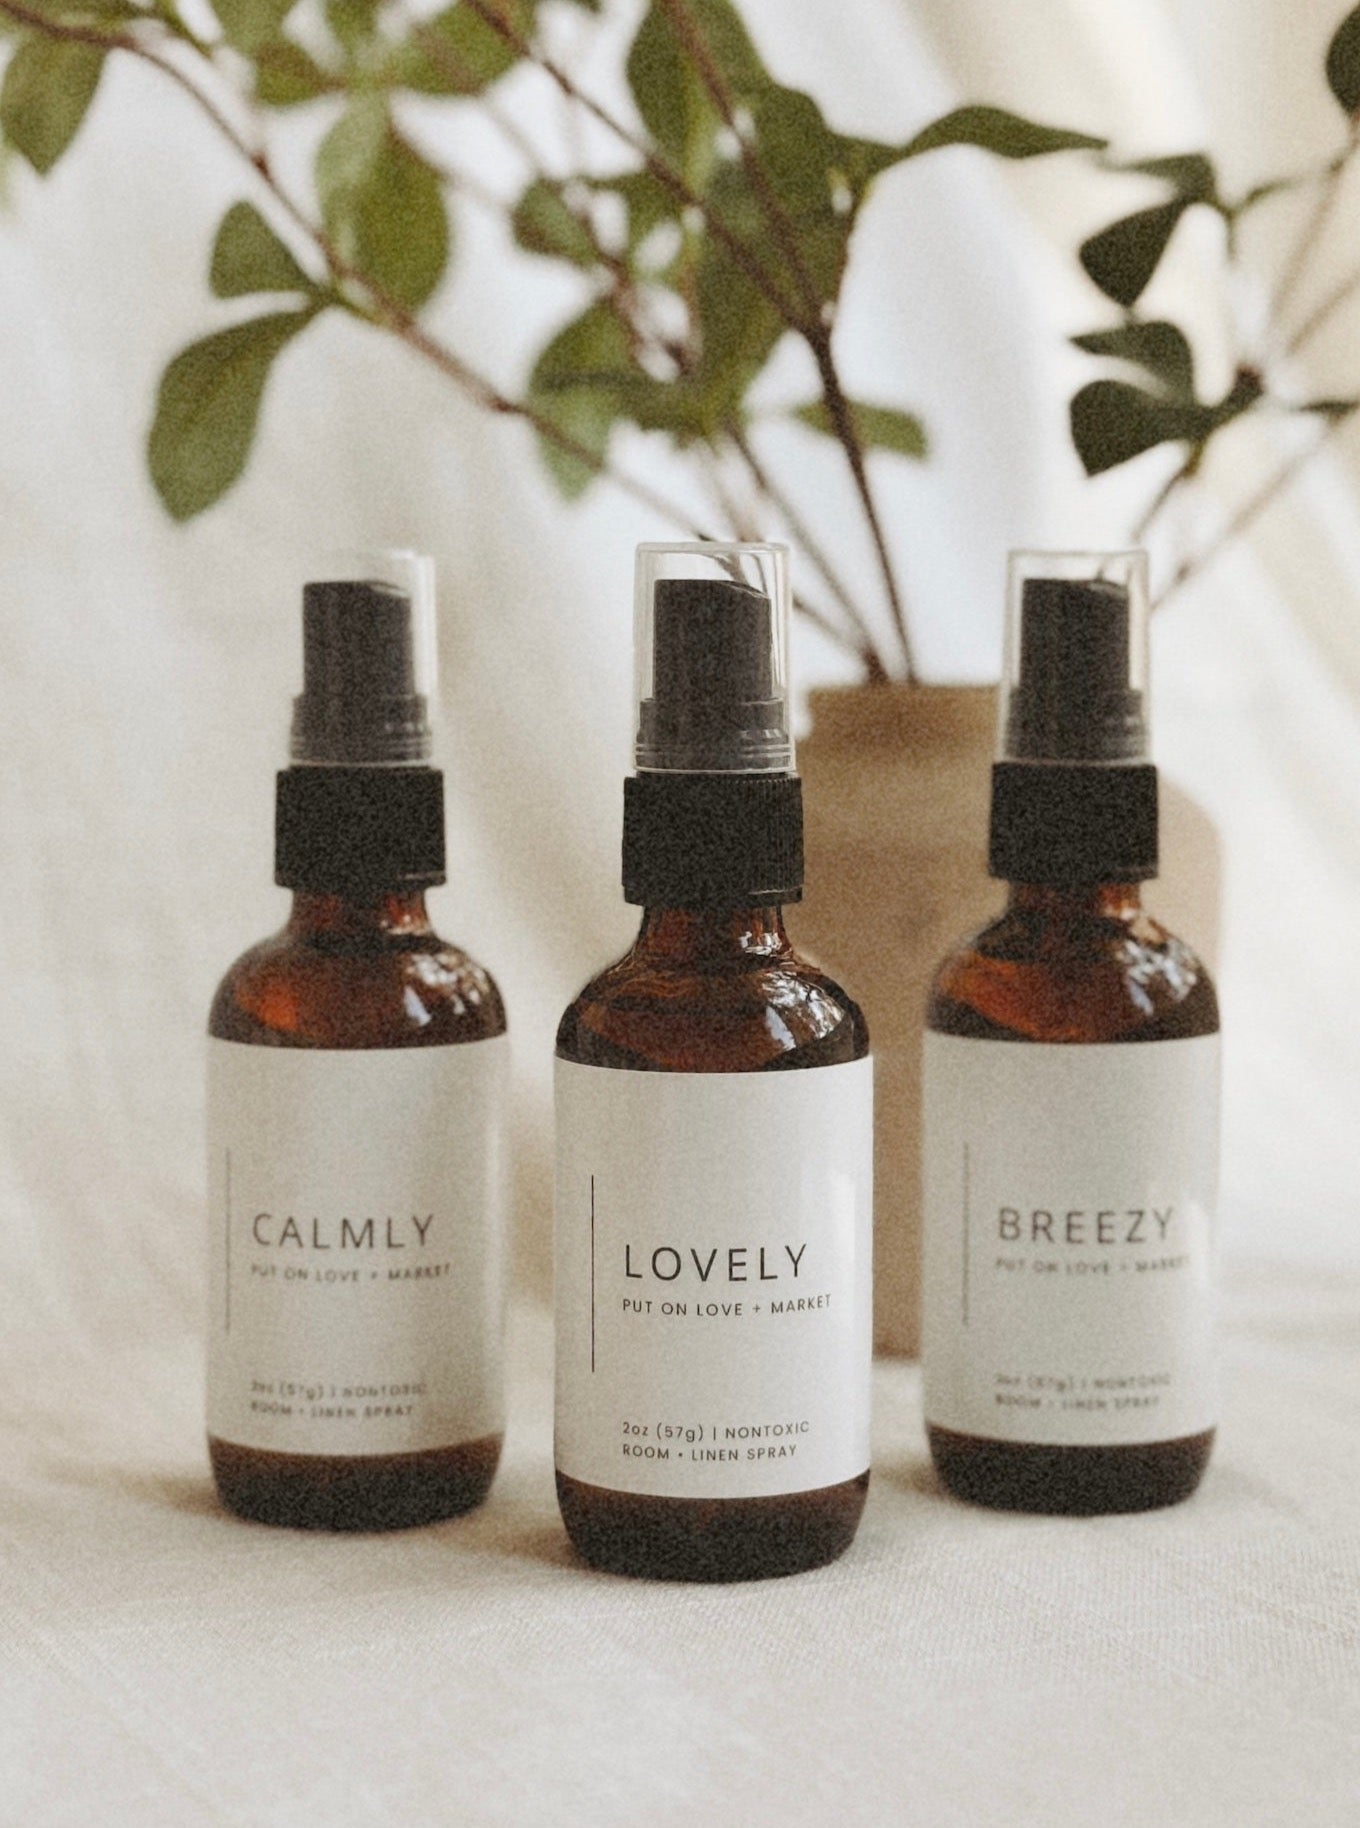 Three room sprays with different labels on them starting from left: CALMLY, LOVELY, BREEZY